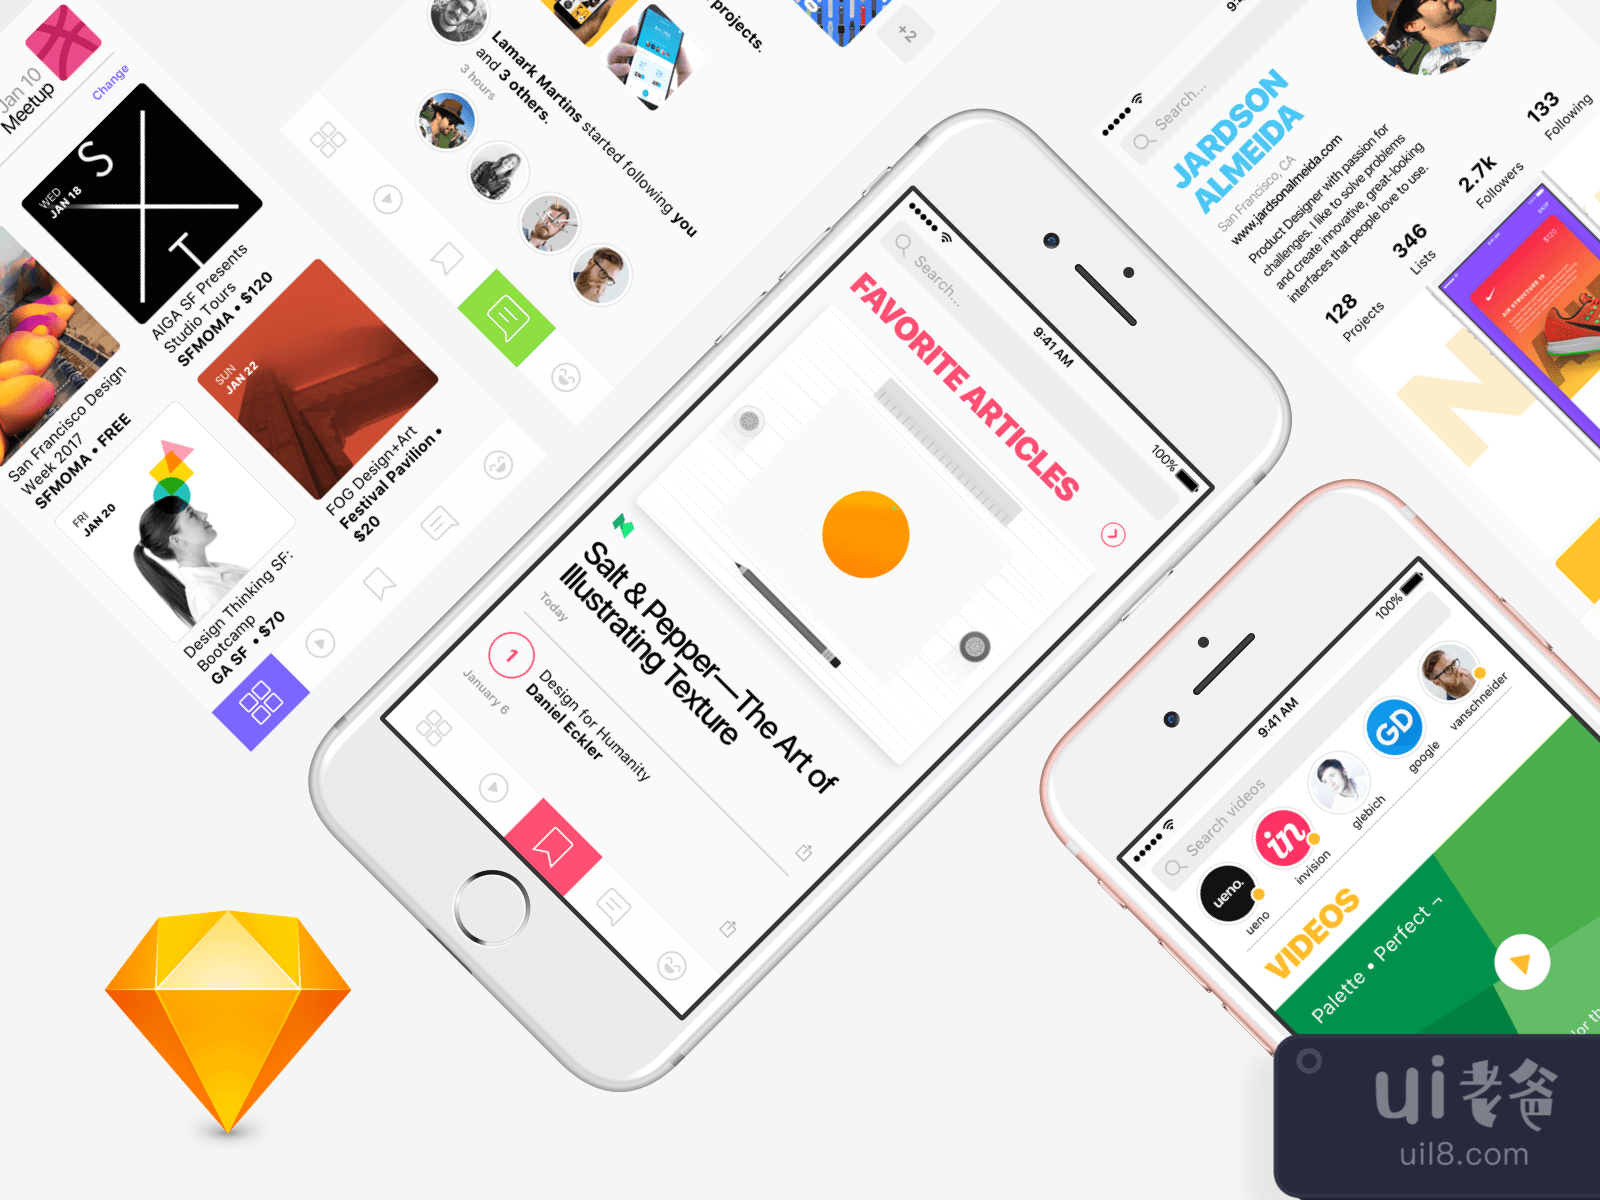 Social Network App Design for Figma and Adobe XD No 1